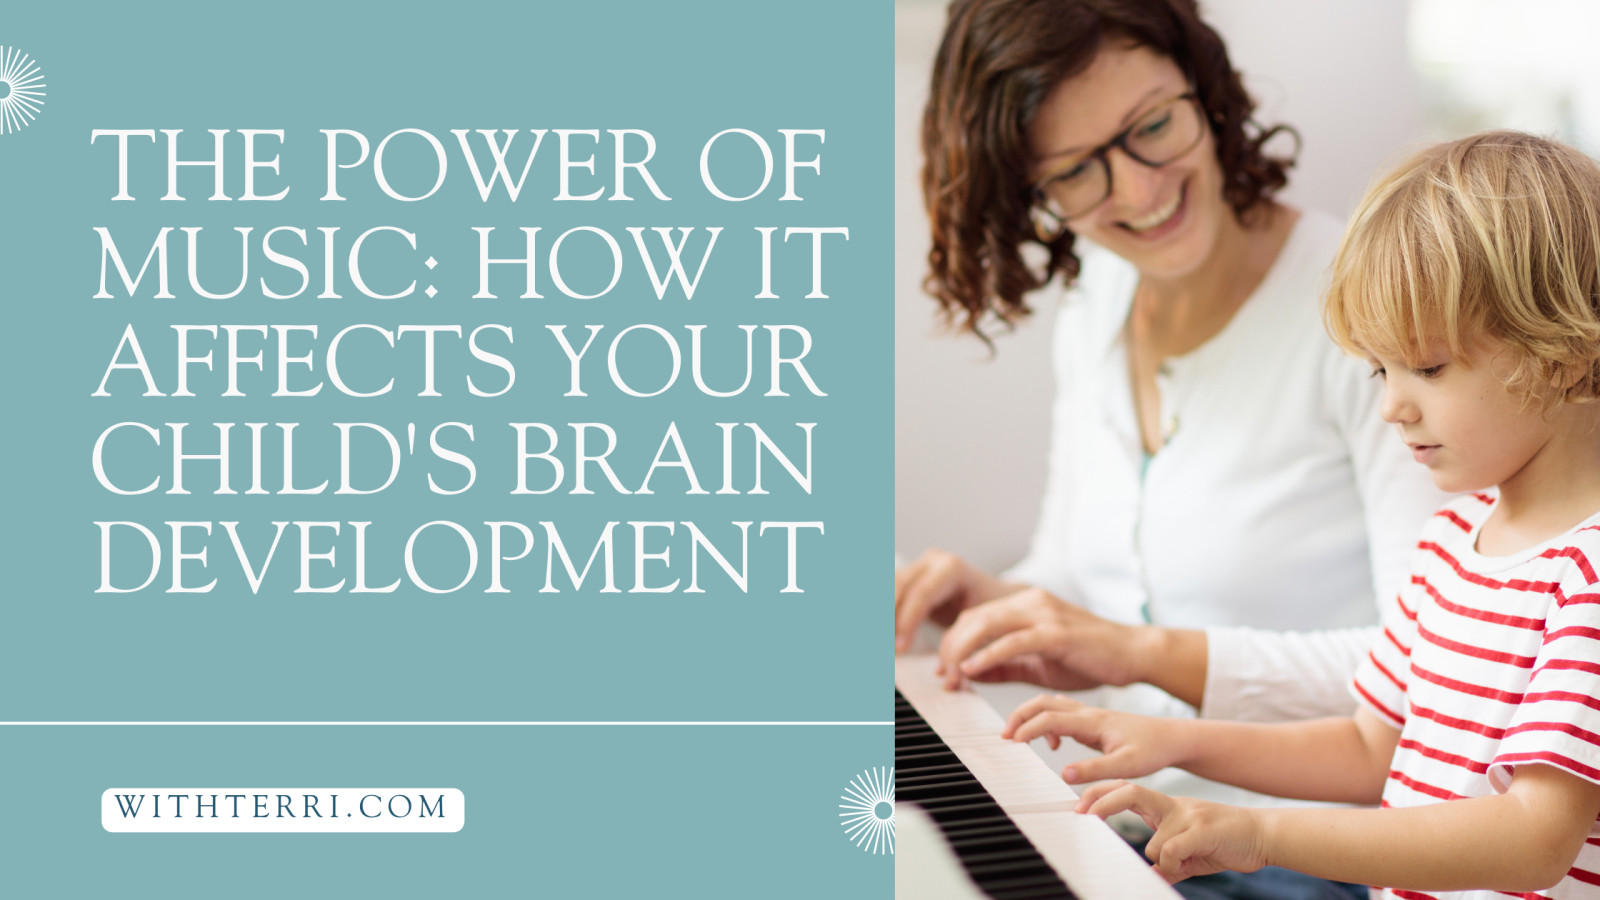 How the Power of Music Affects the Brain